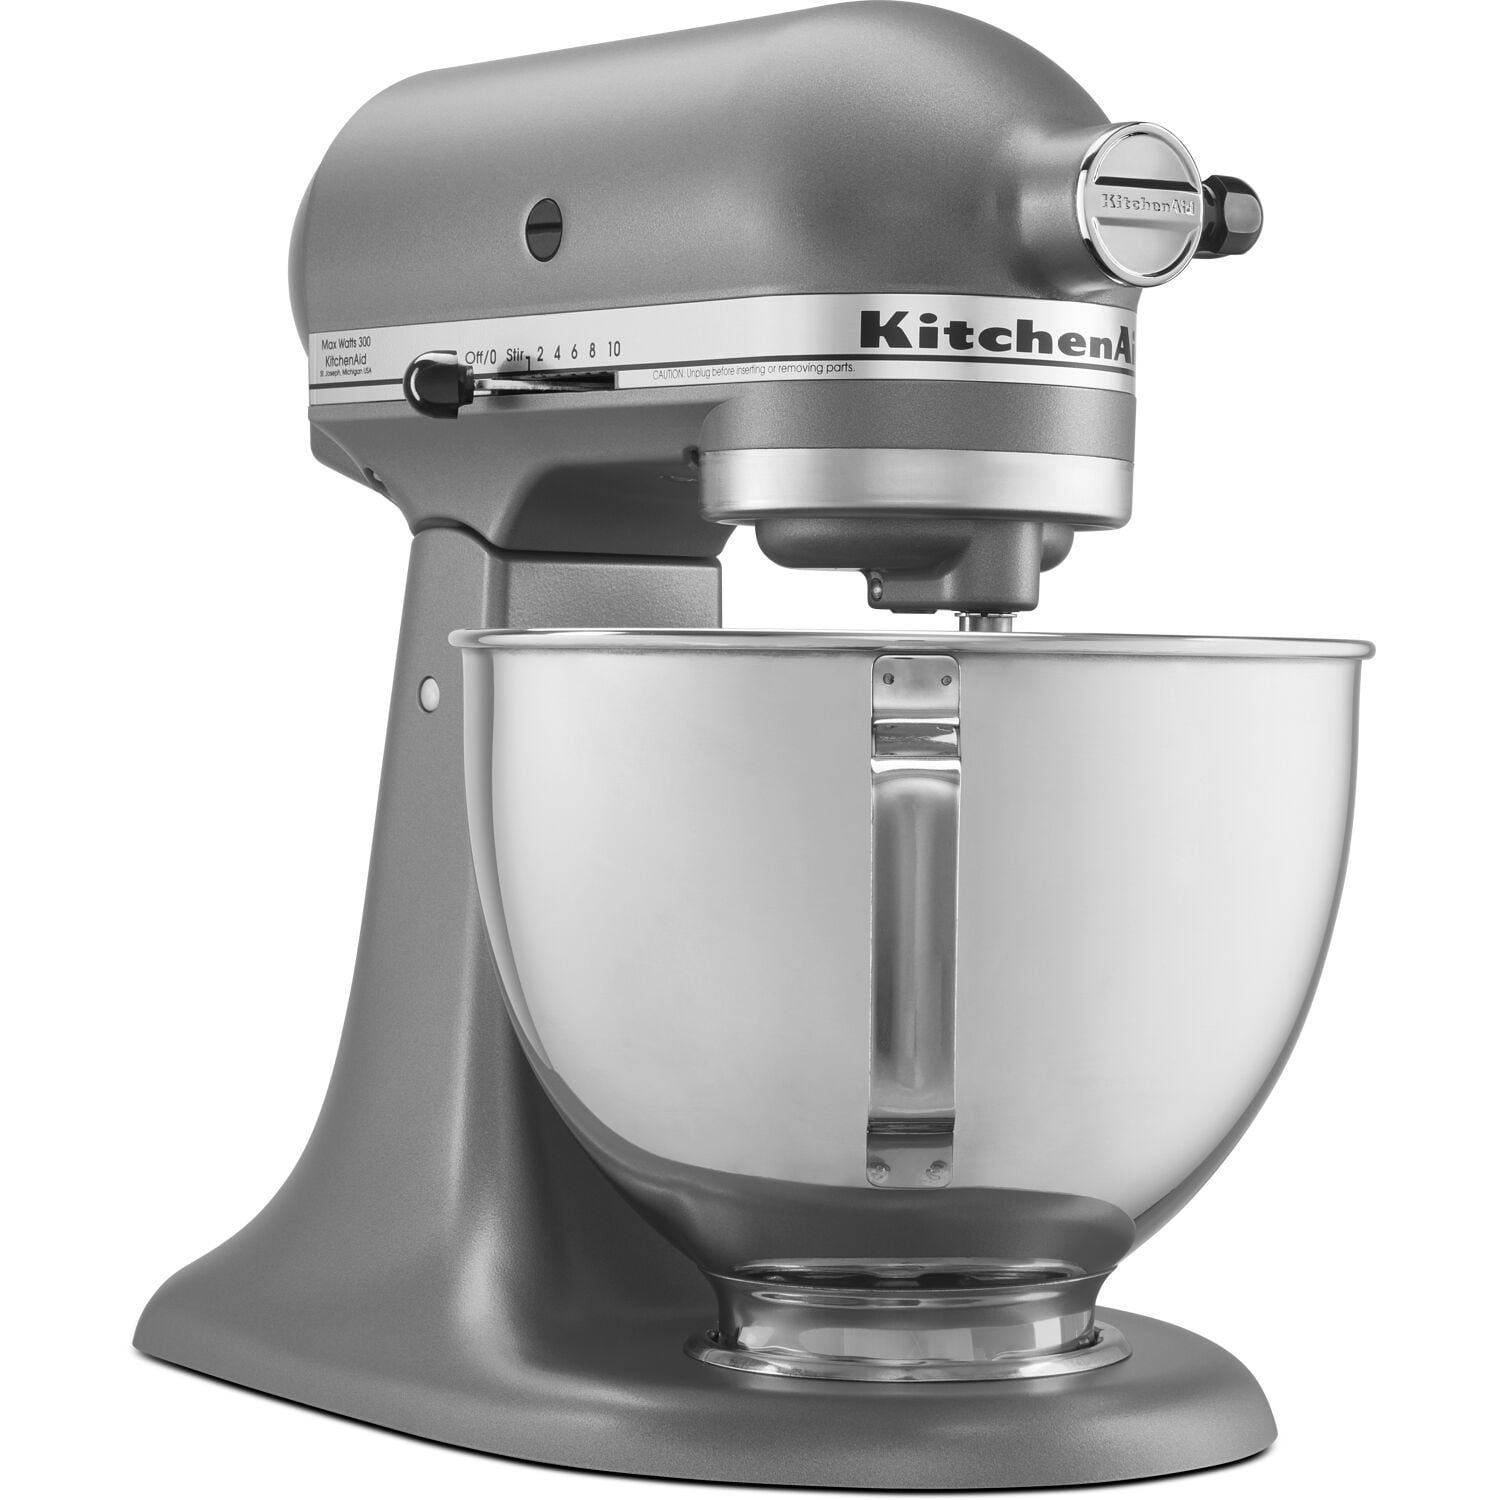 https://ak1.ostkcdn.com/images/products/is/images/direct/ffeda3637da582423e58b7819f0d48eac6b36a42/KitchenAid-Deluxe-4.5-Quart-Tilt-Head-Stand-Mixer-in-Silver.jpg